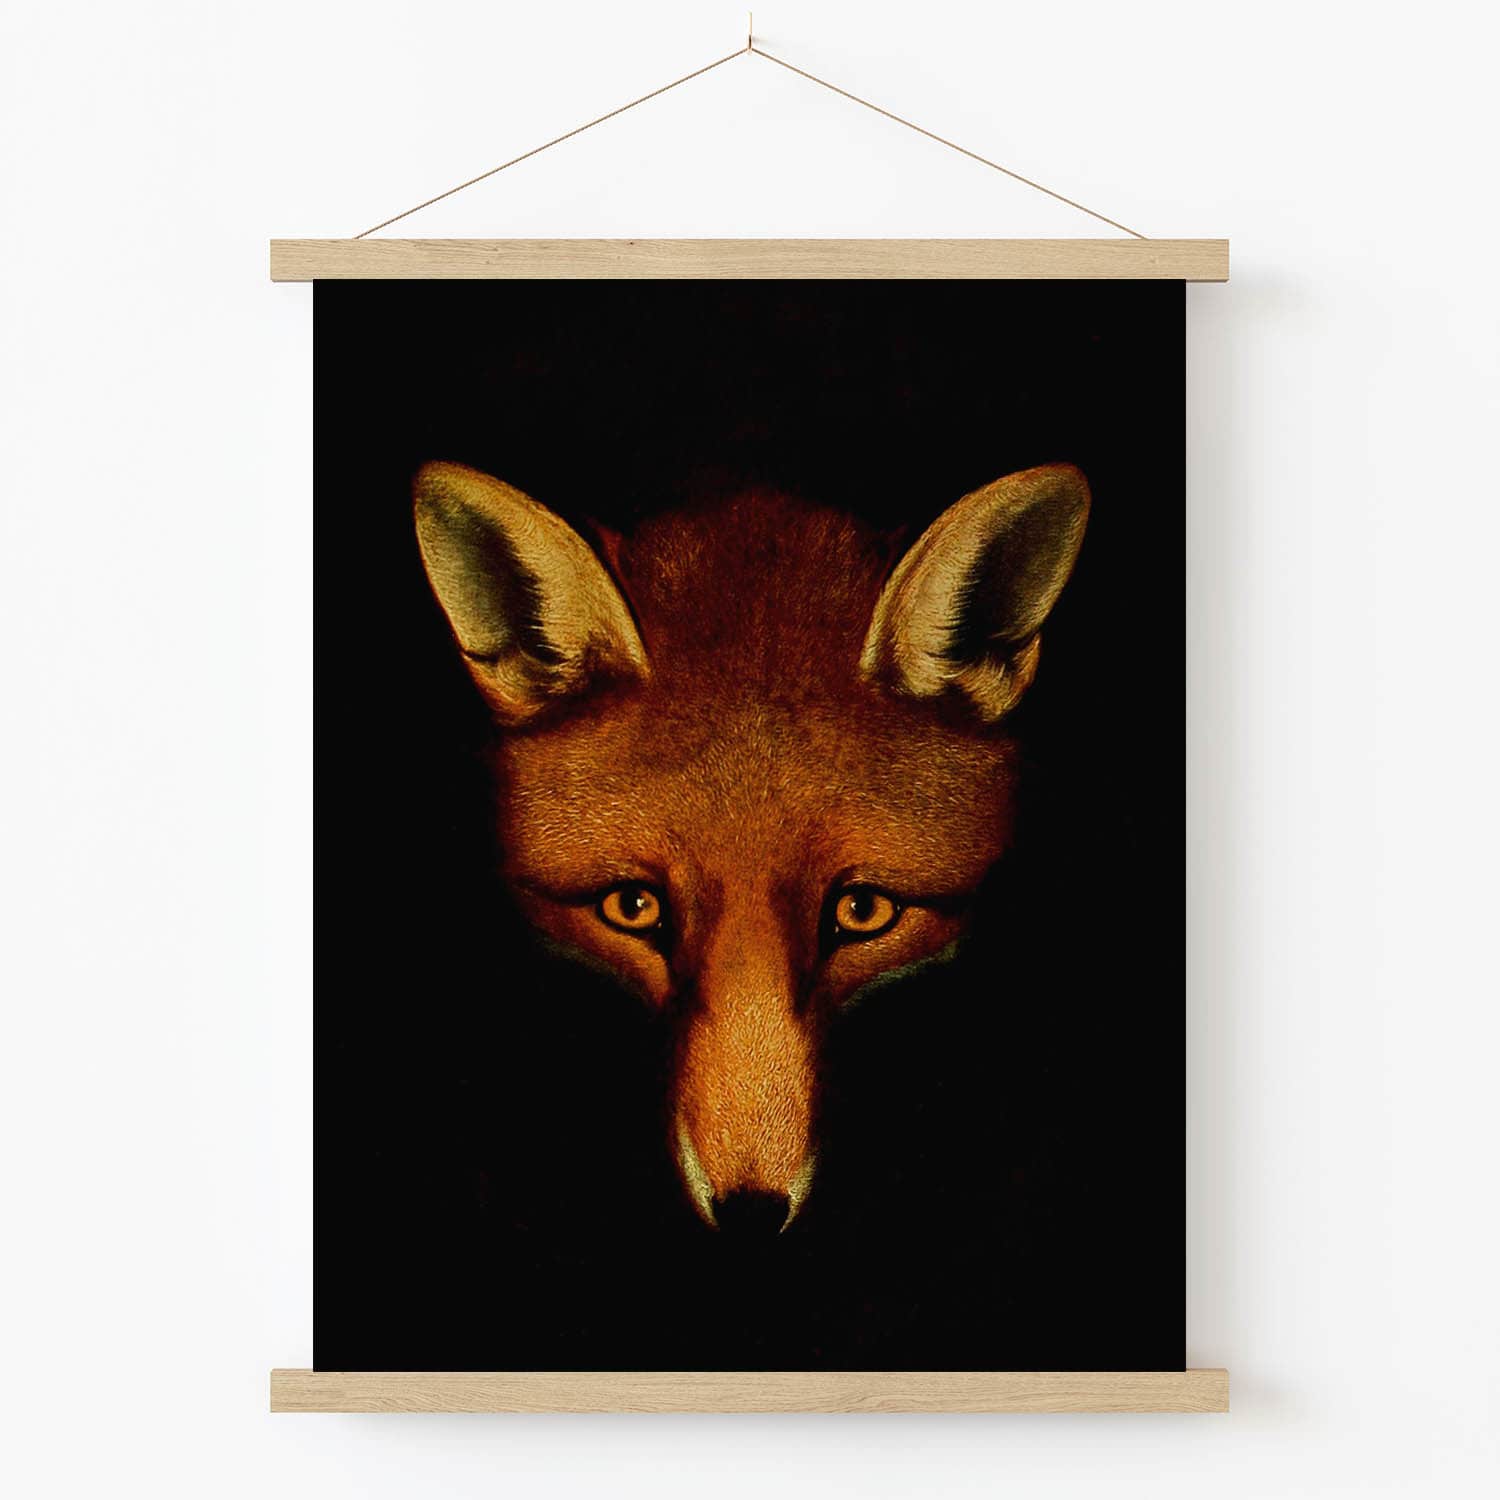 Large Red Fox Head Art Print in Wood Hanger Frame on Wall